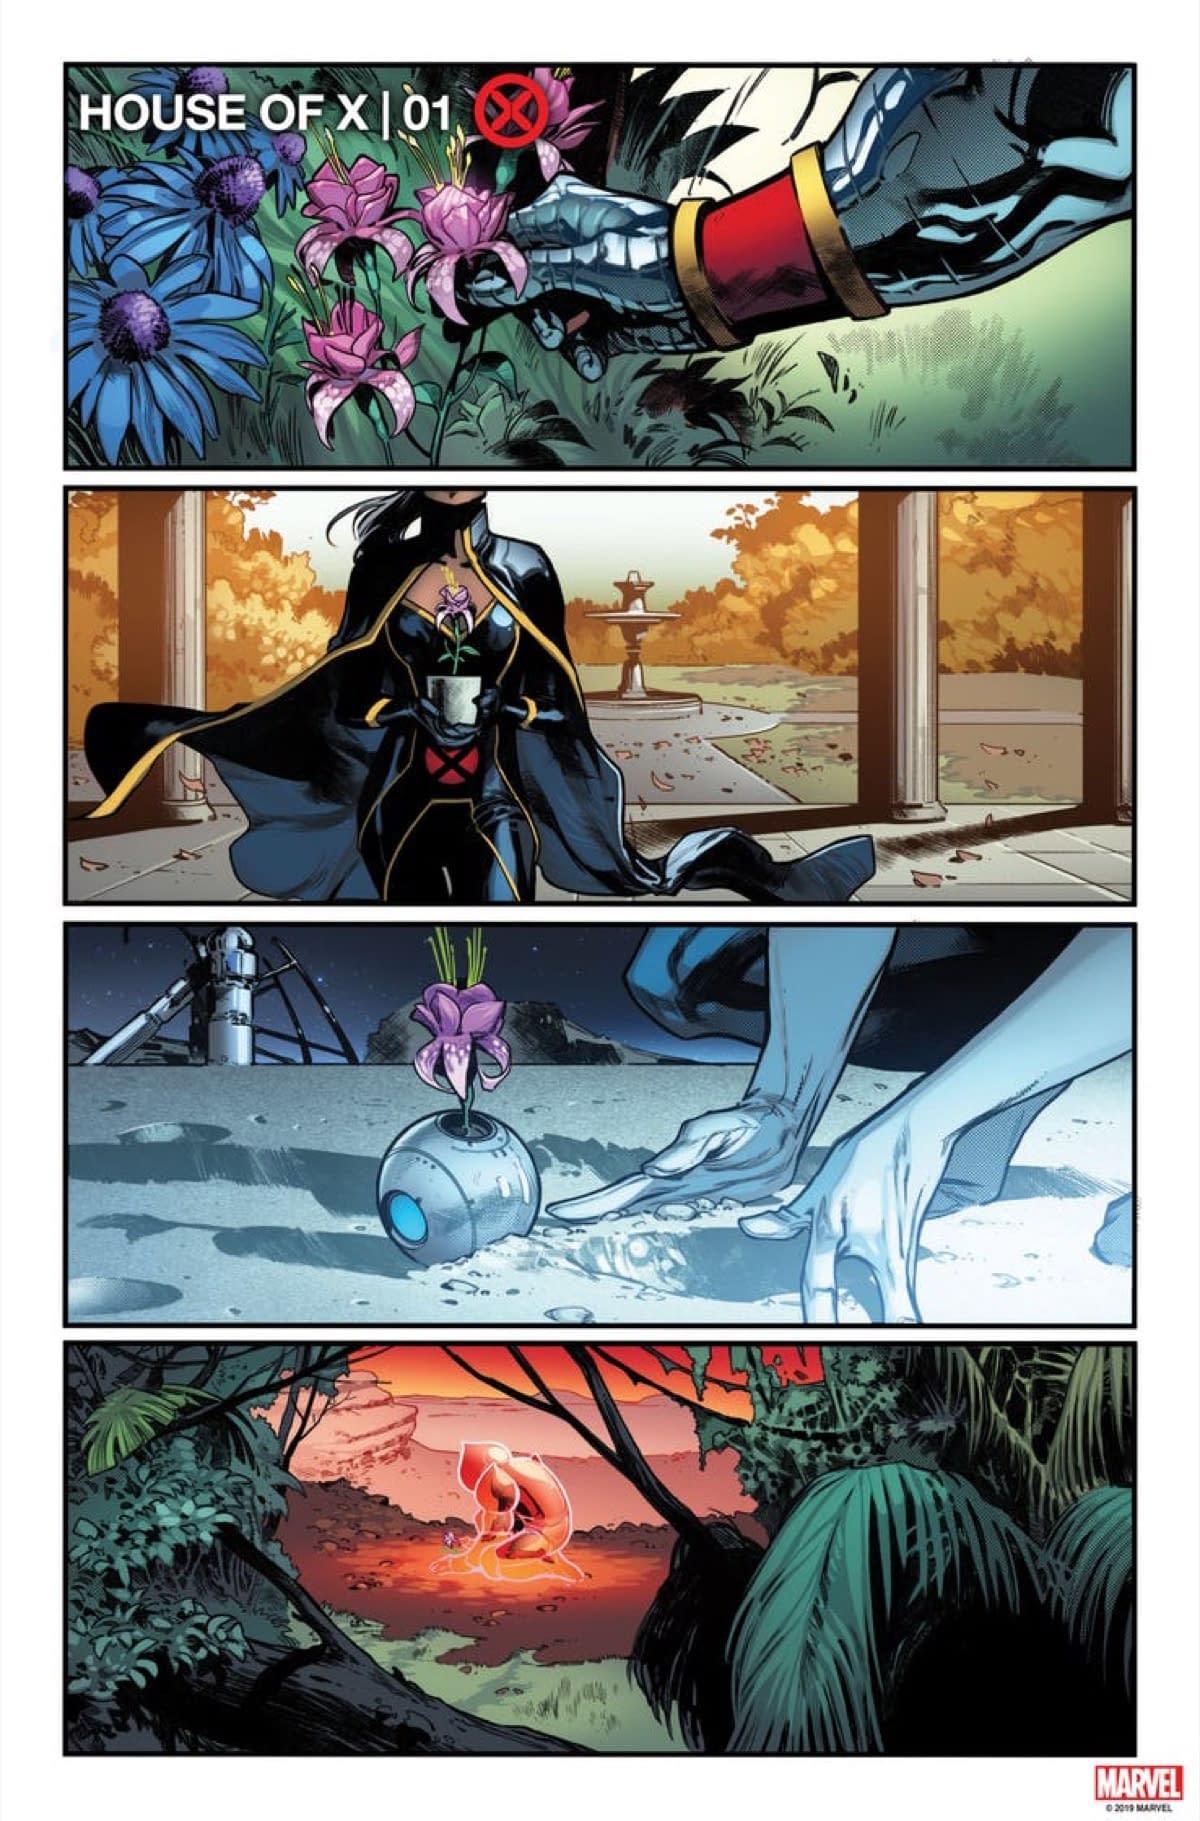 Yet Another Look Inside House of X and Powers of X